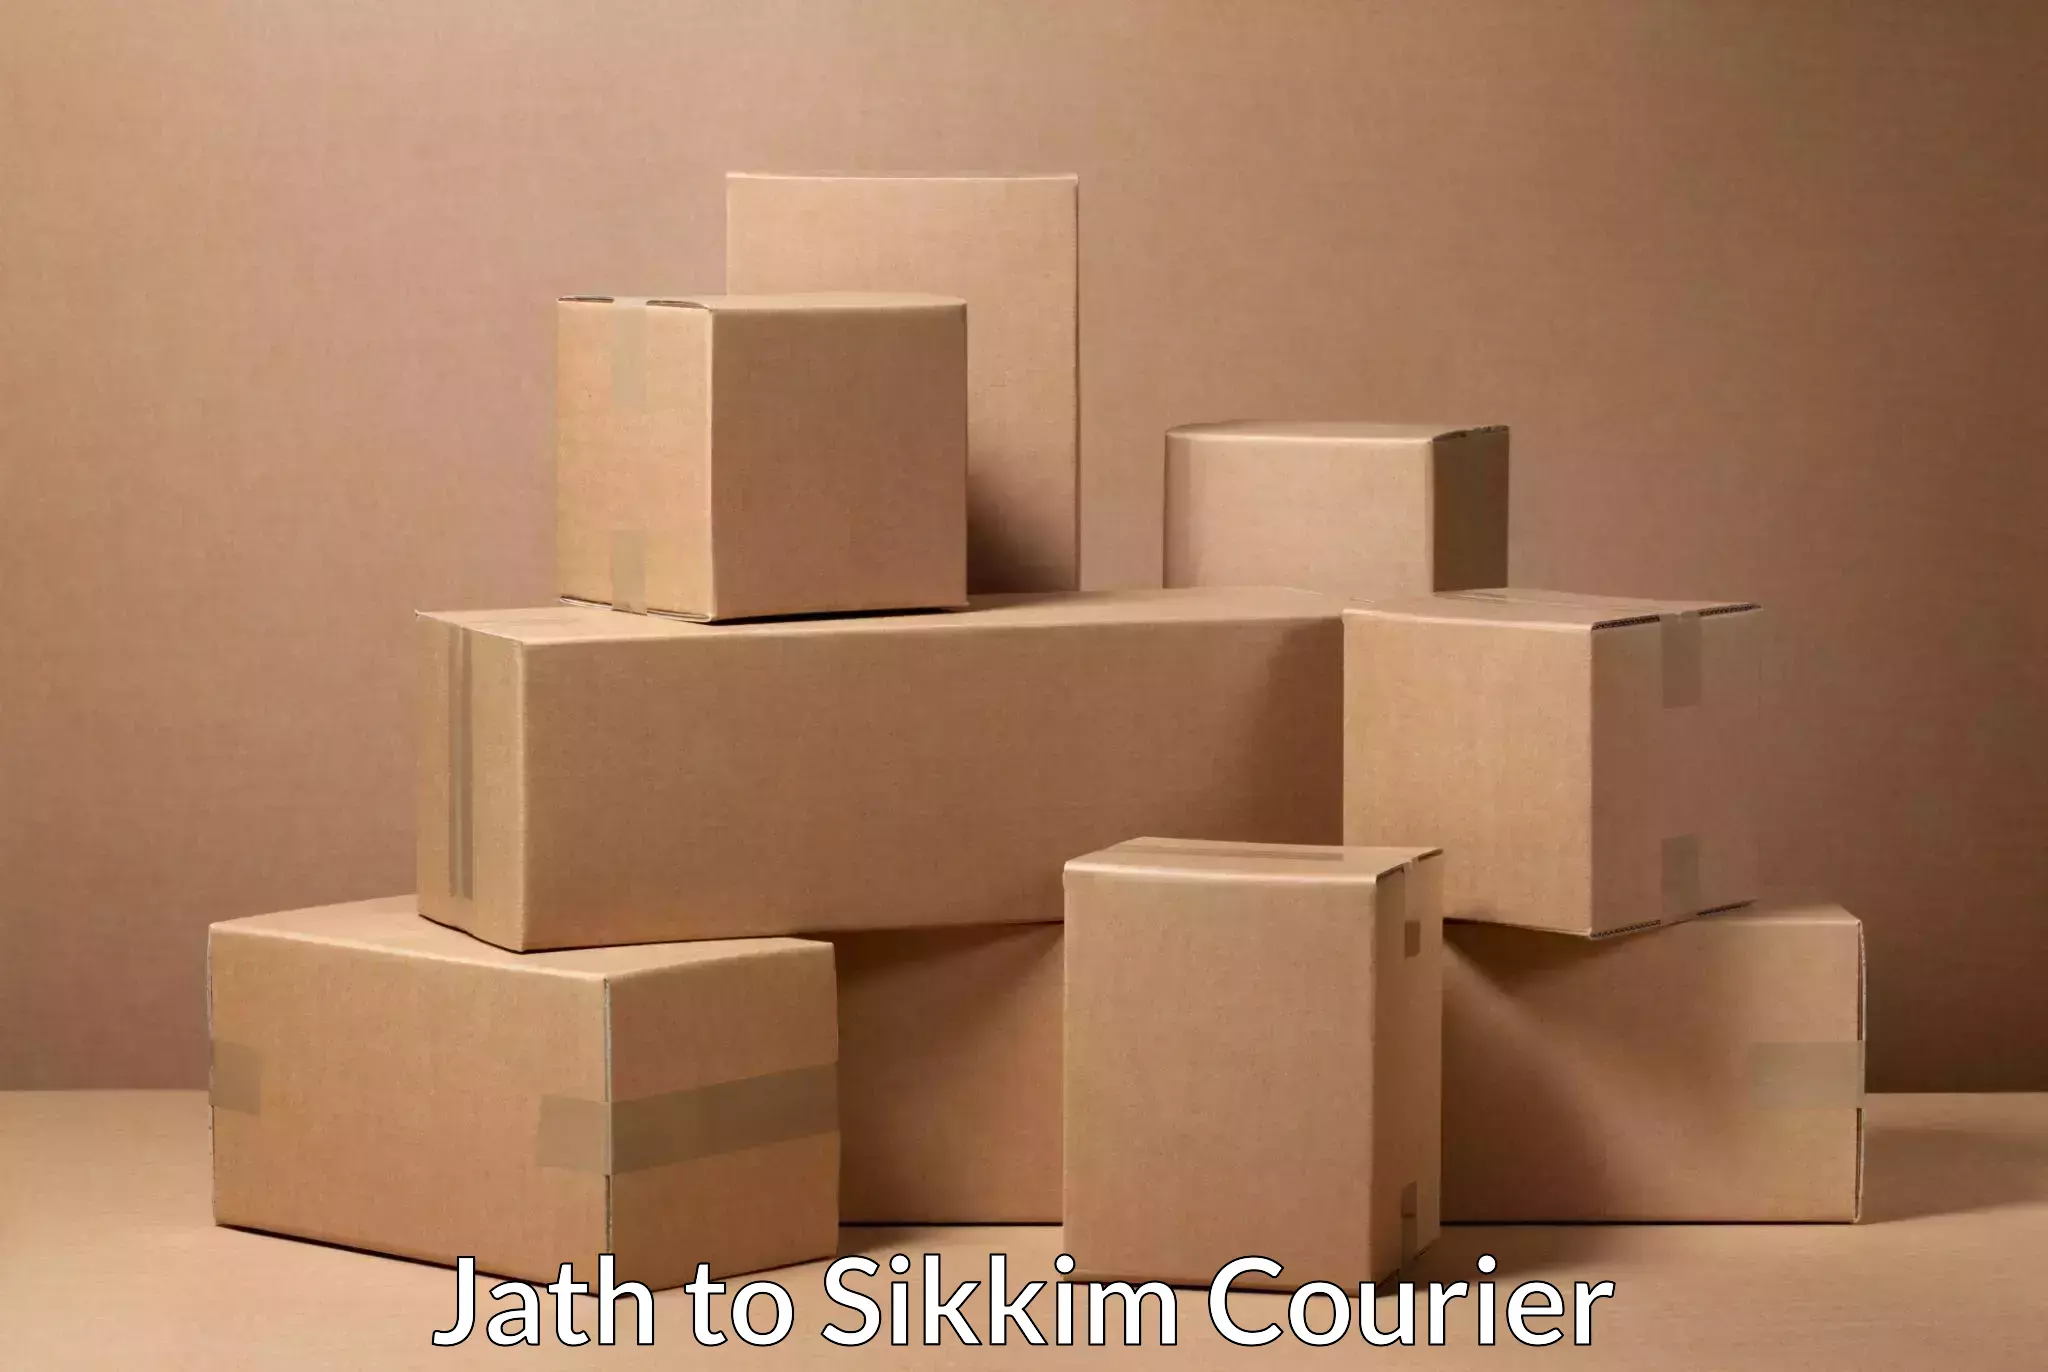 High-capacity parcel service Jath to East Sikkim